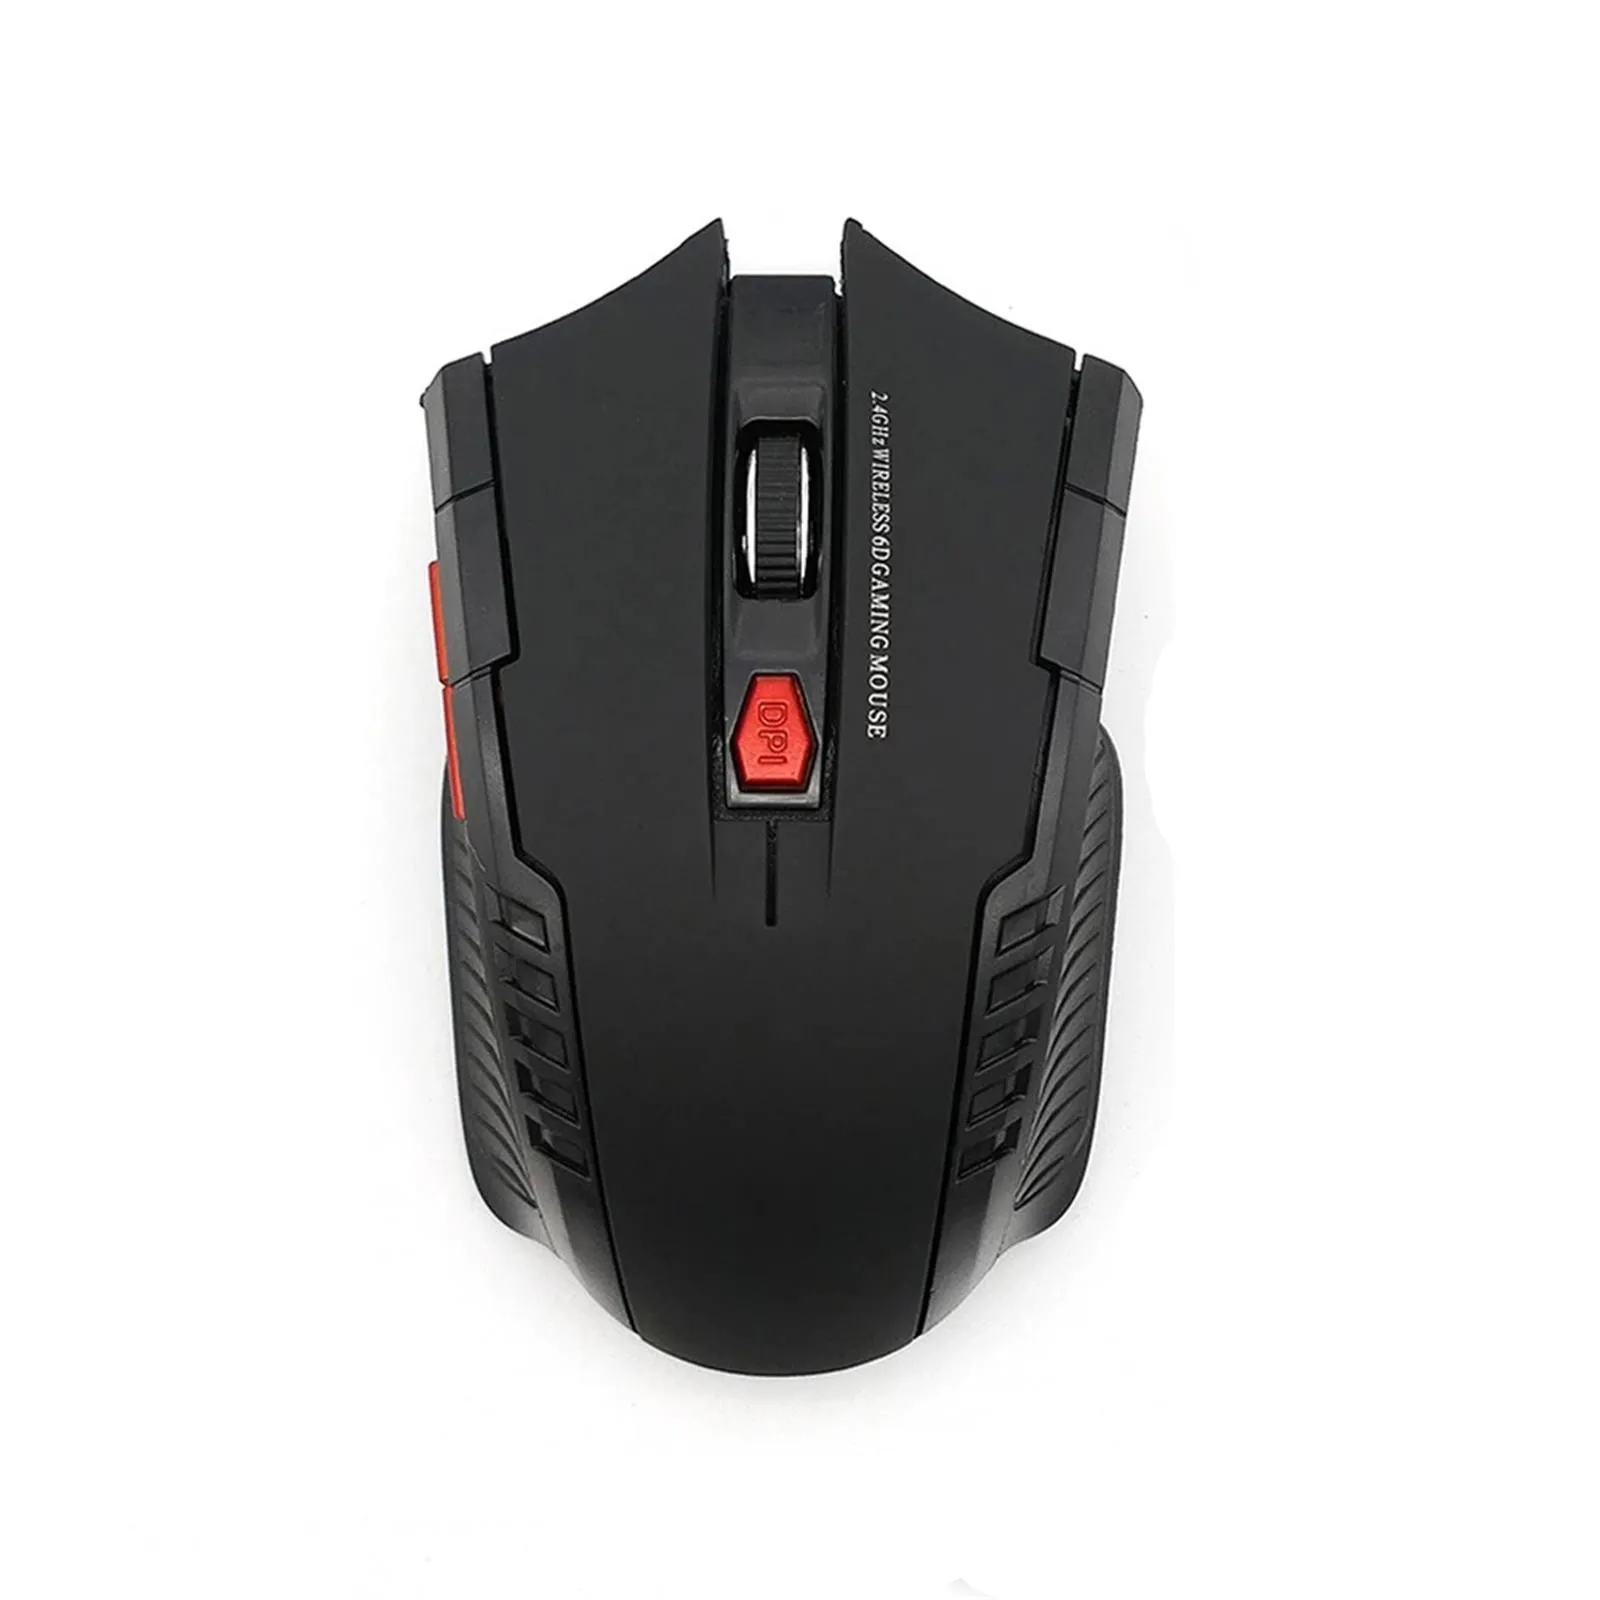 2000DPI 2.4GHz Wireless Optical Mouse Gamer for PC Gaming Laptops New Game Wireless Mice with USB Receiver Drop Shipping Mause silent wireless mouse